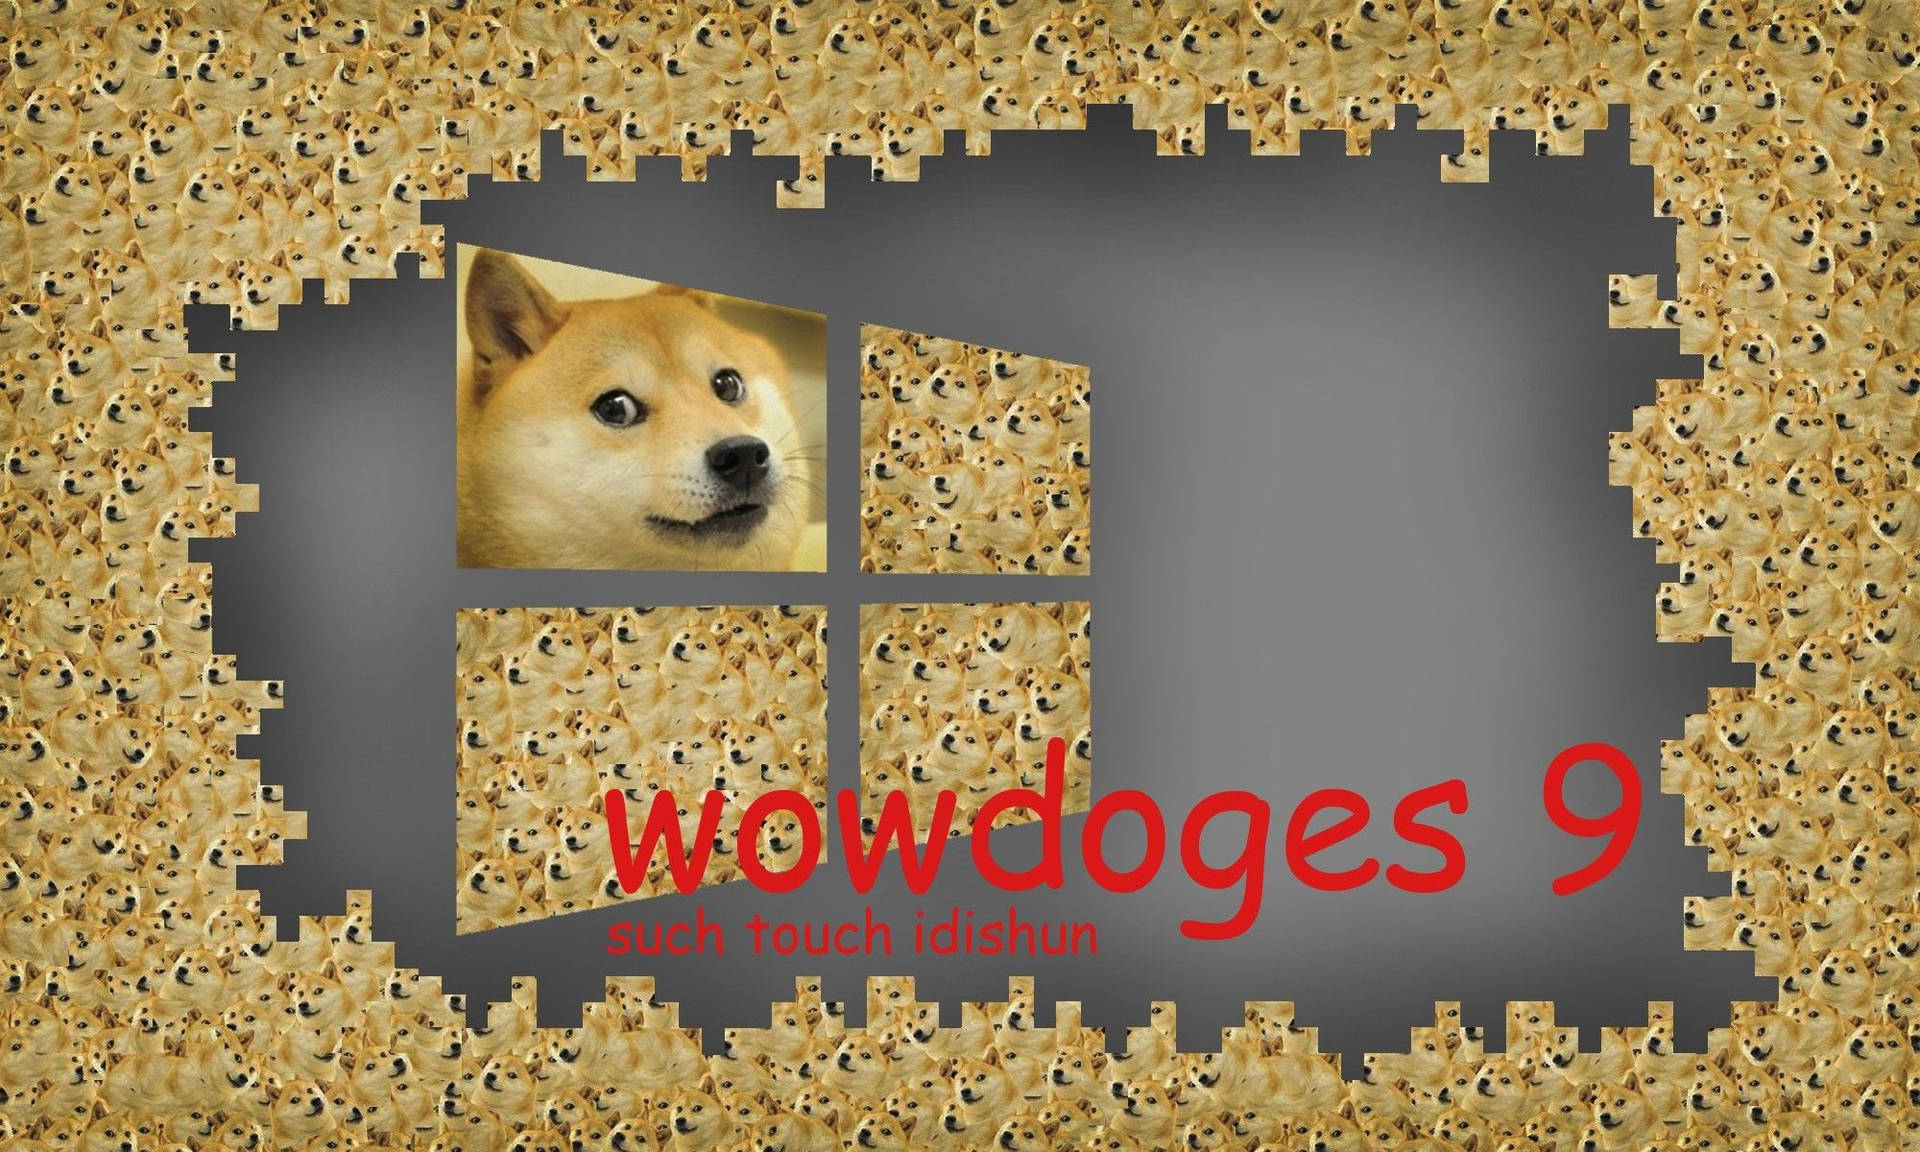 Woah! Such Doge Background